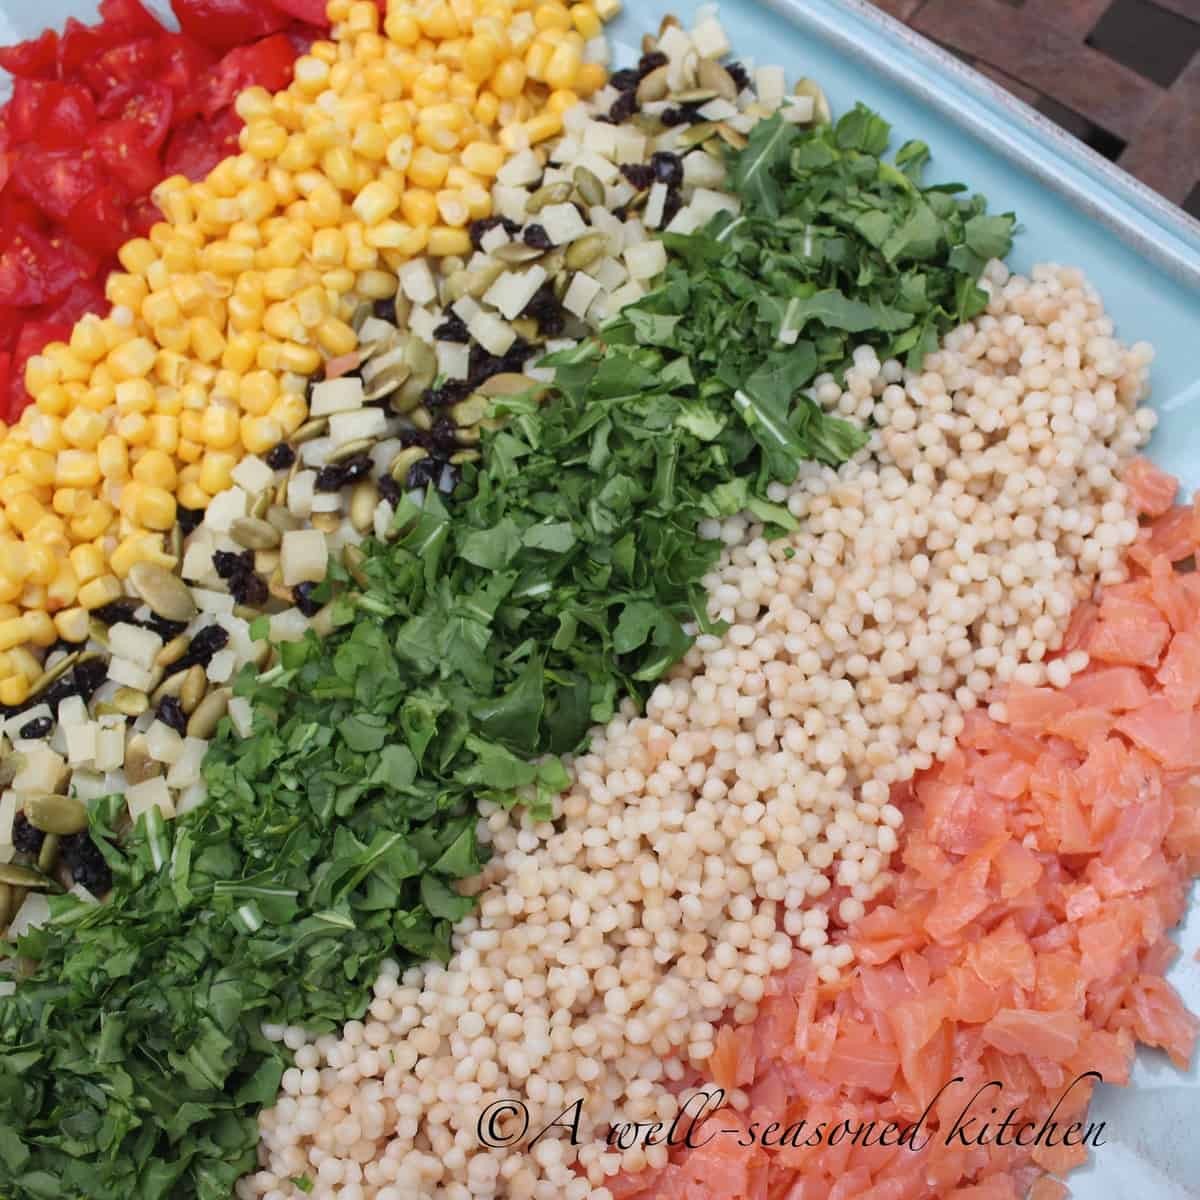 Smoked Salmon chopped salad with ingredients all in rows, like a cobb salad.